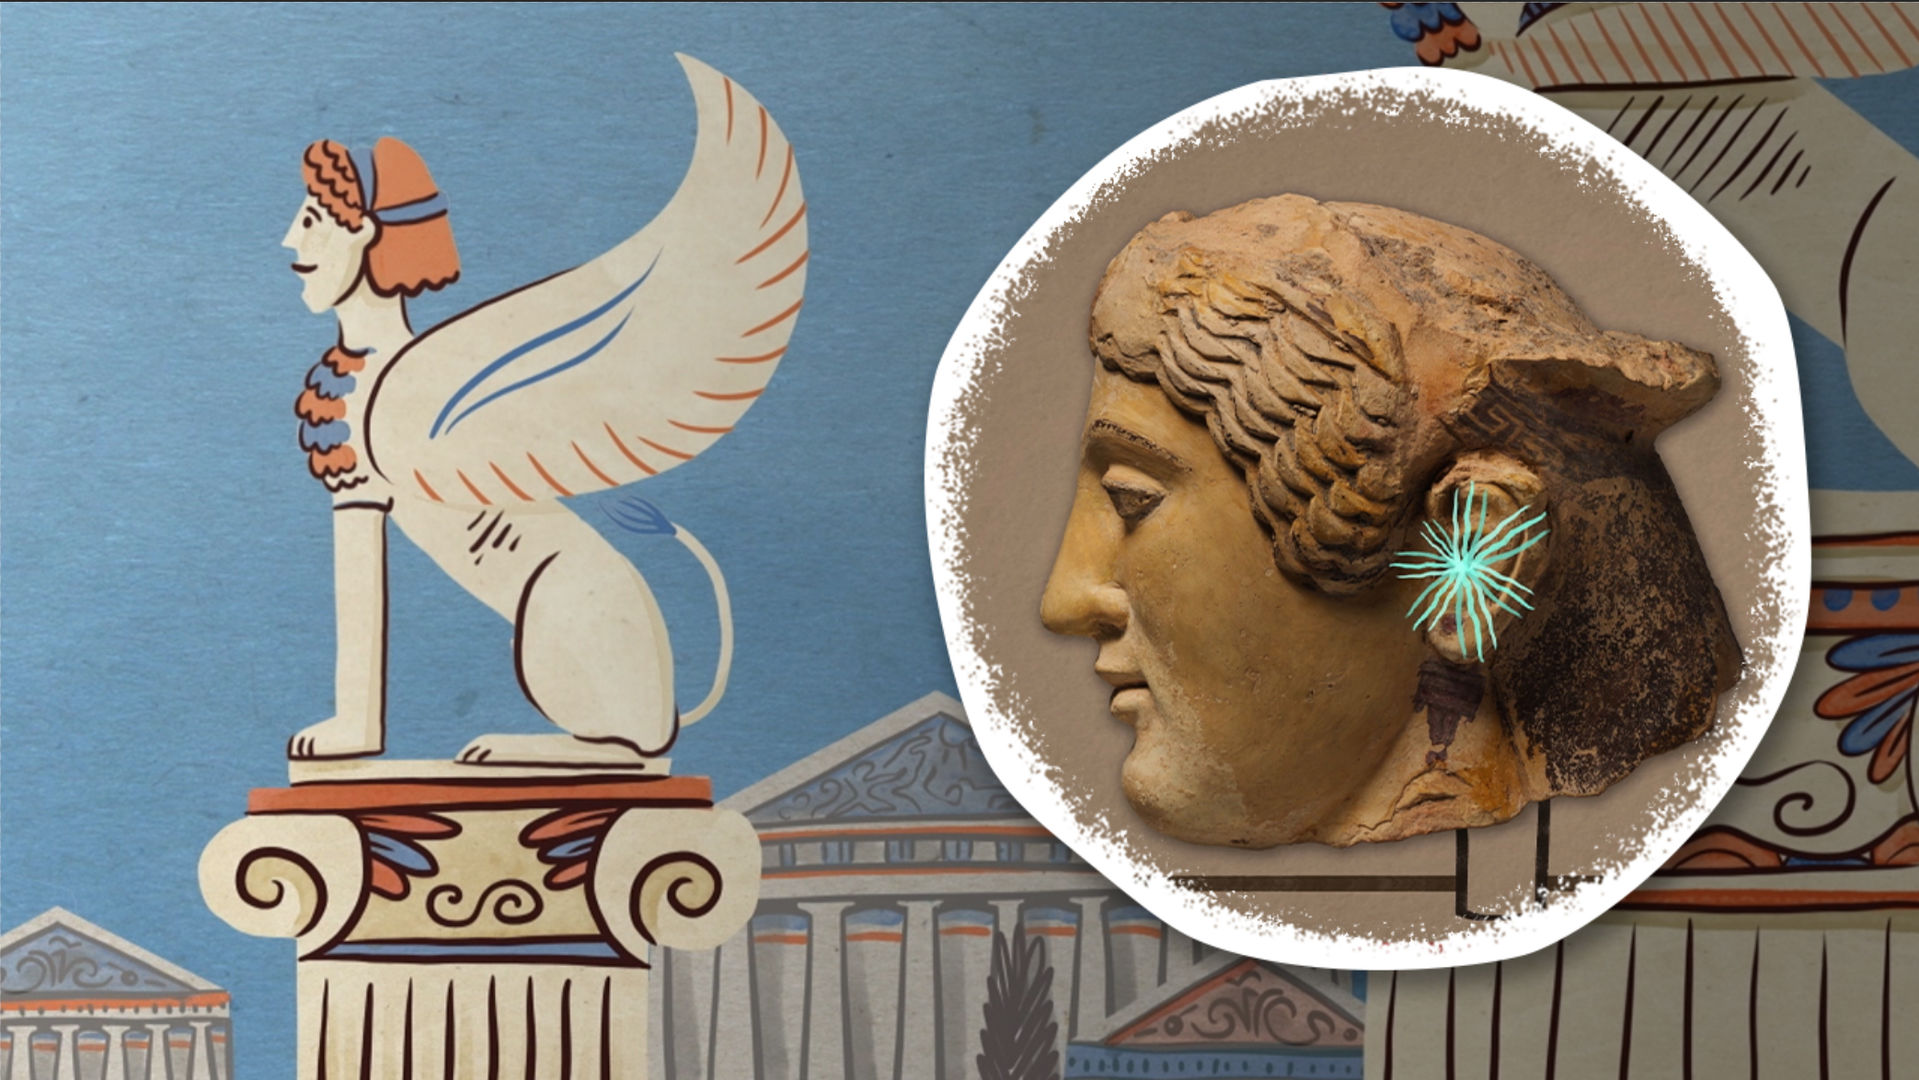 A cartoon sphinx seated on a column in ancient Greece. Inset to the right shows a photograph of the terracotta head of a woman with cartoon crystals growing from her ear.